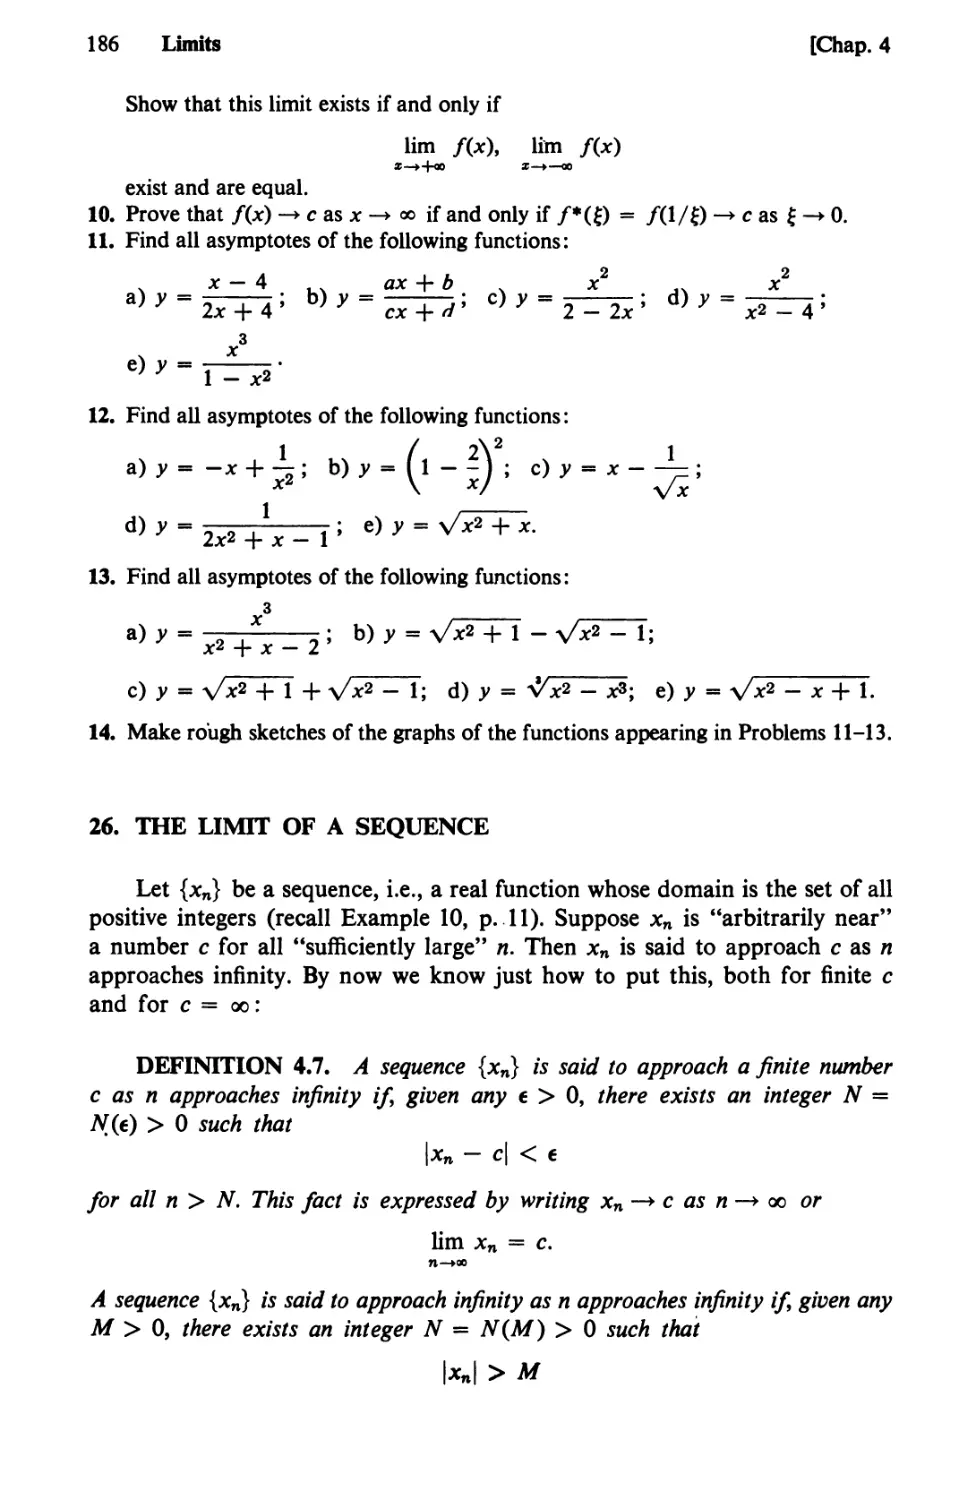 26. The Limit of a Sequence